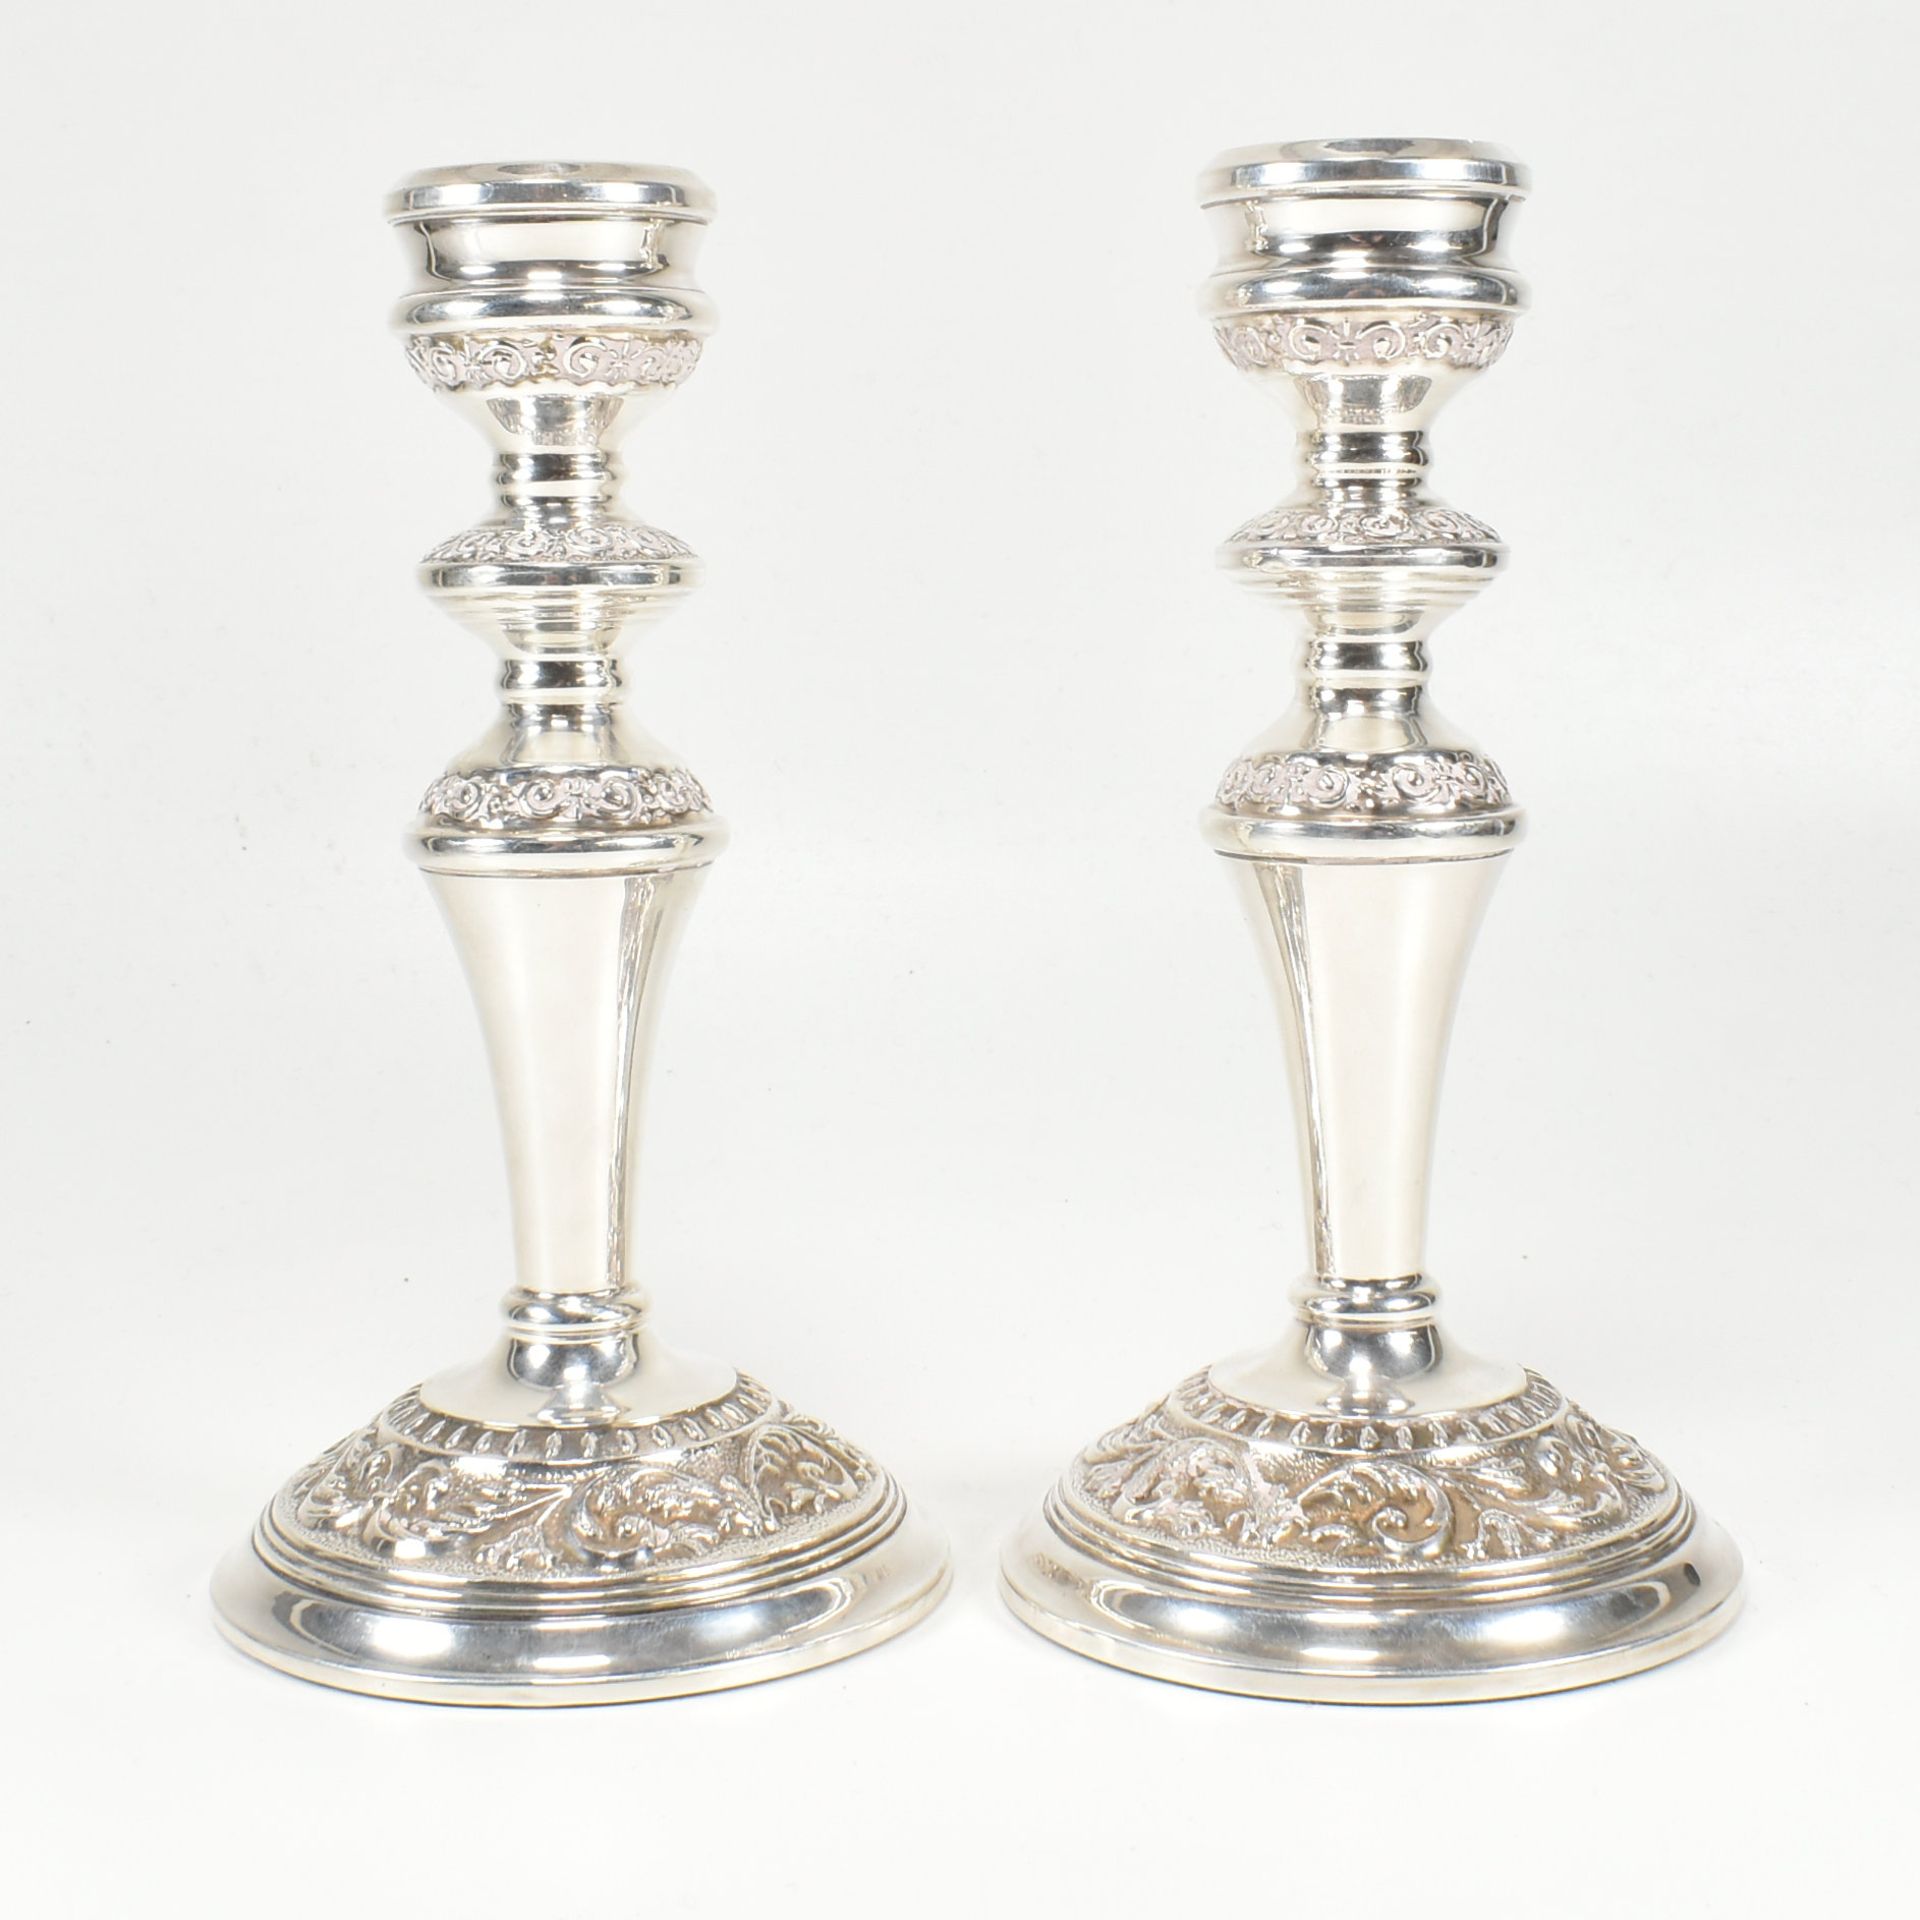 PAIR OF 1970S HALLMARKED SILVER MOUNTED CANDLESTICKS - Image 2 of 7